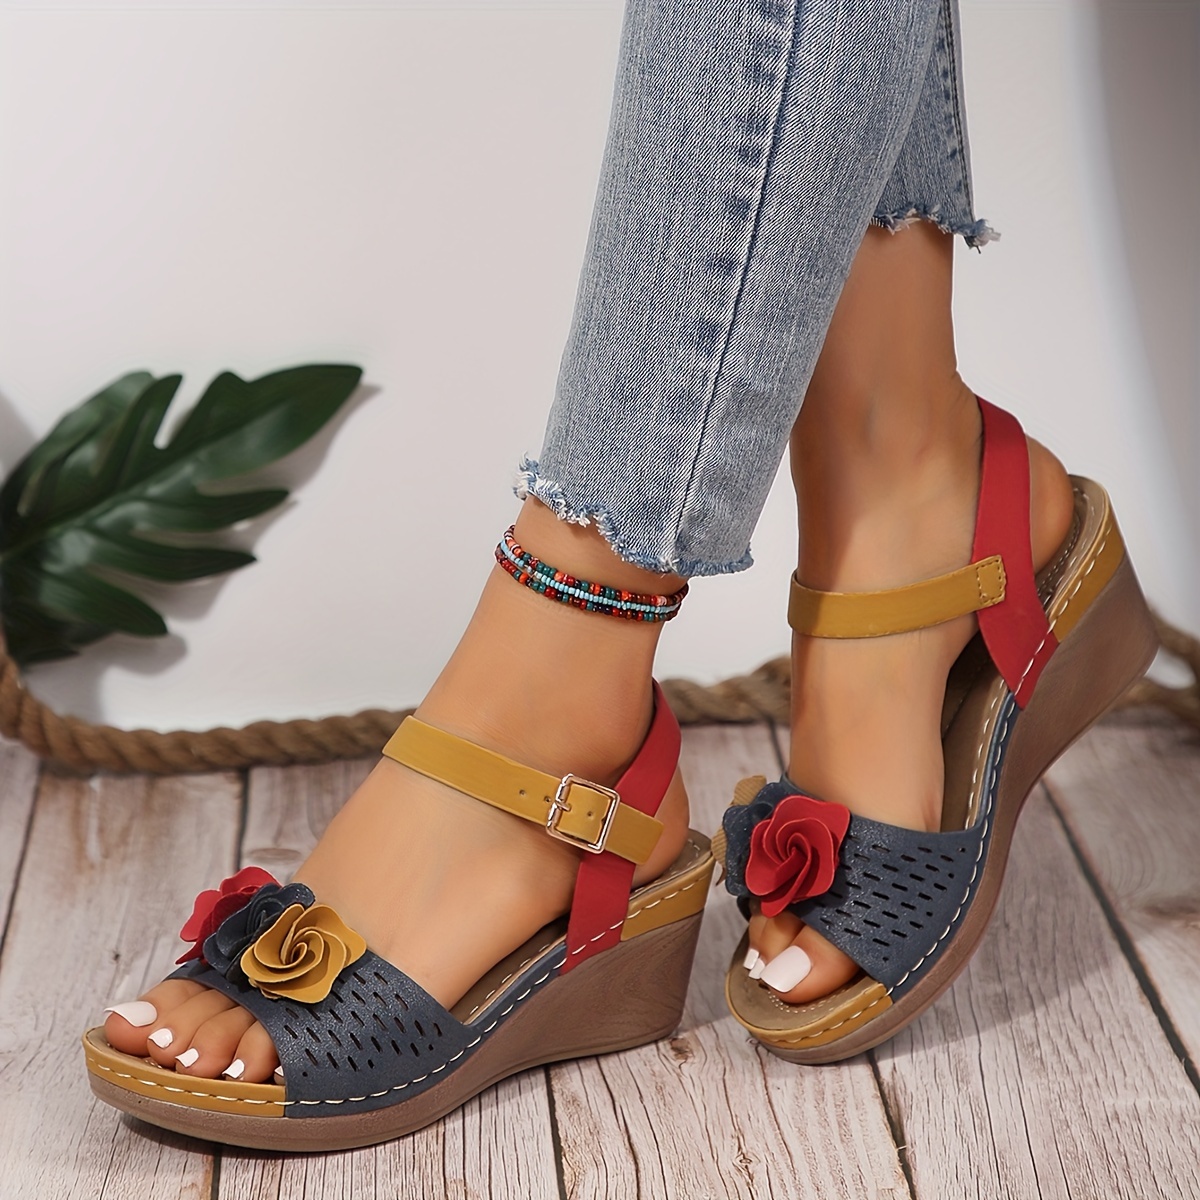 

Women's Colorblock Fashion Sandals, Sweet Style Lightweight Floral Decor Vacation Shoes, Summer Wedge Soft Sole Footwear